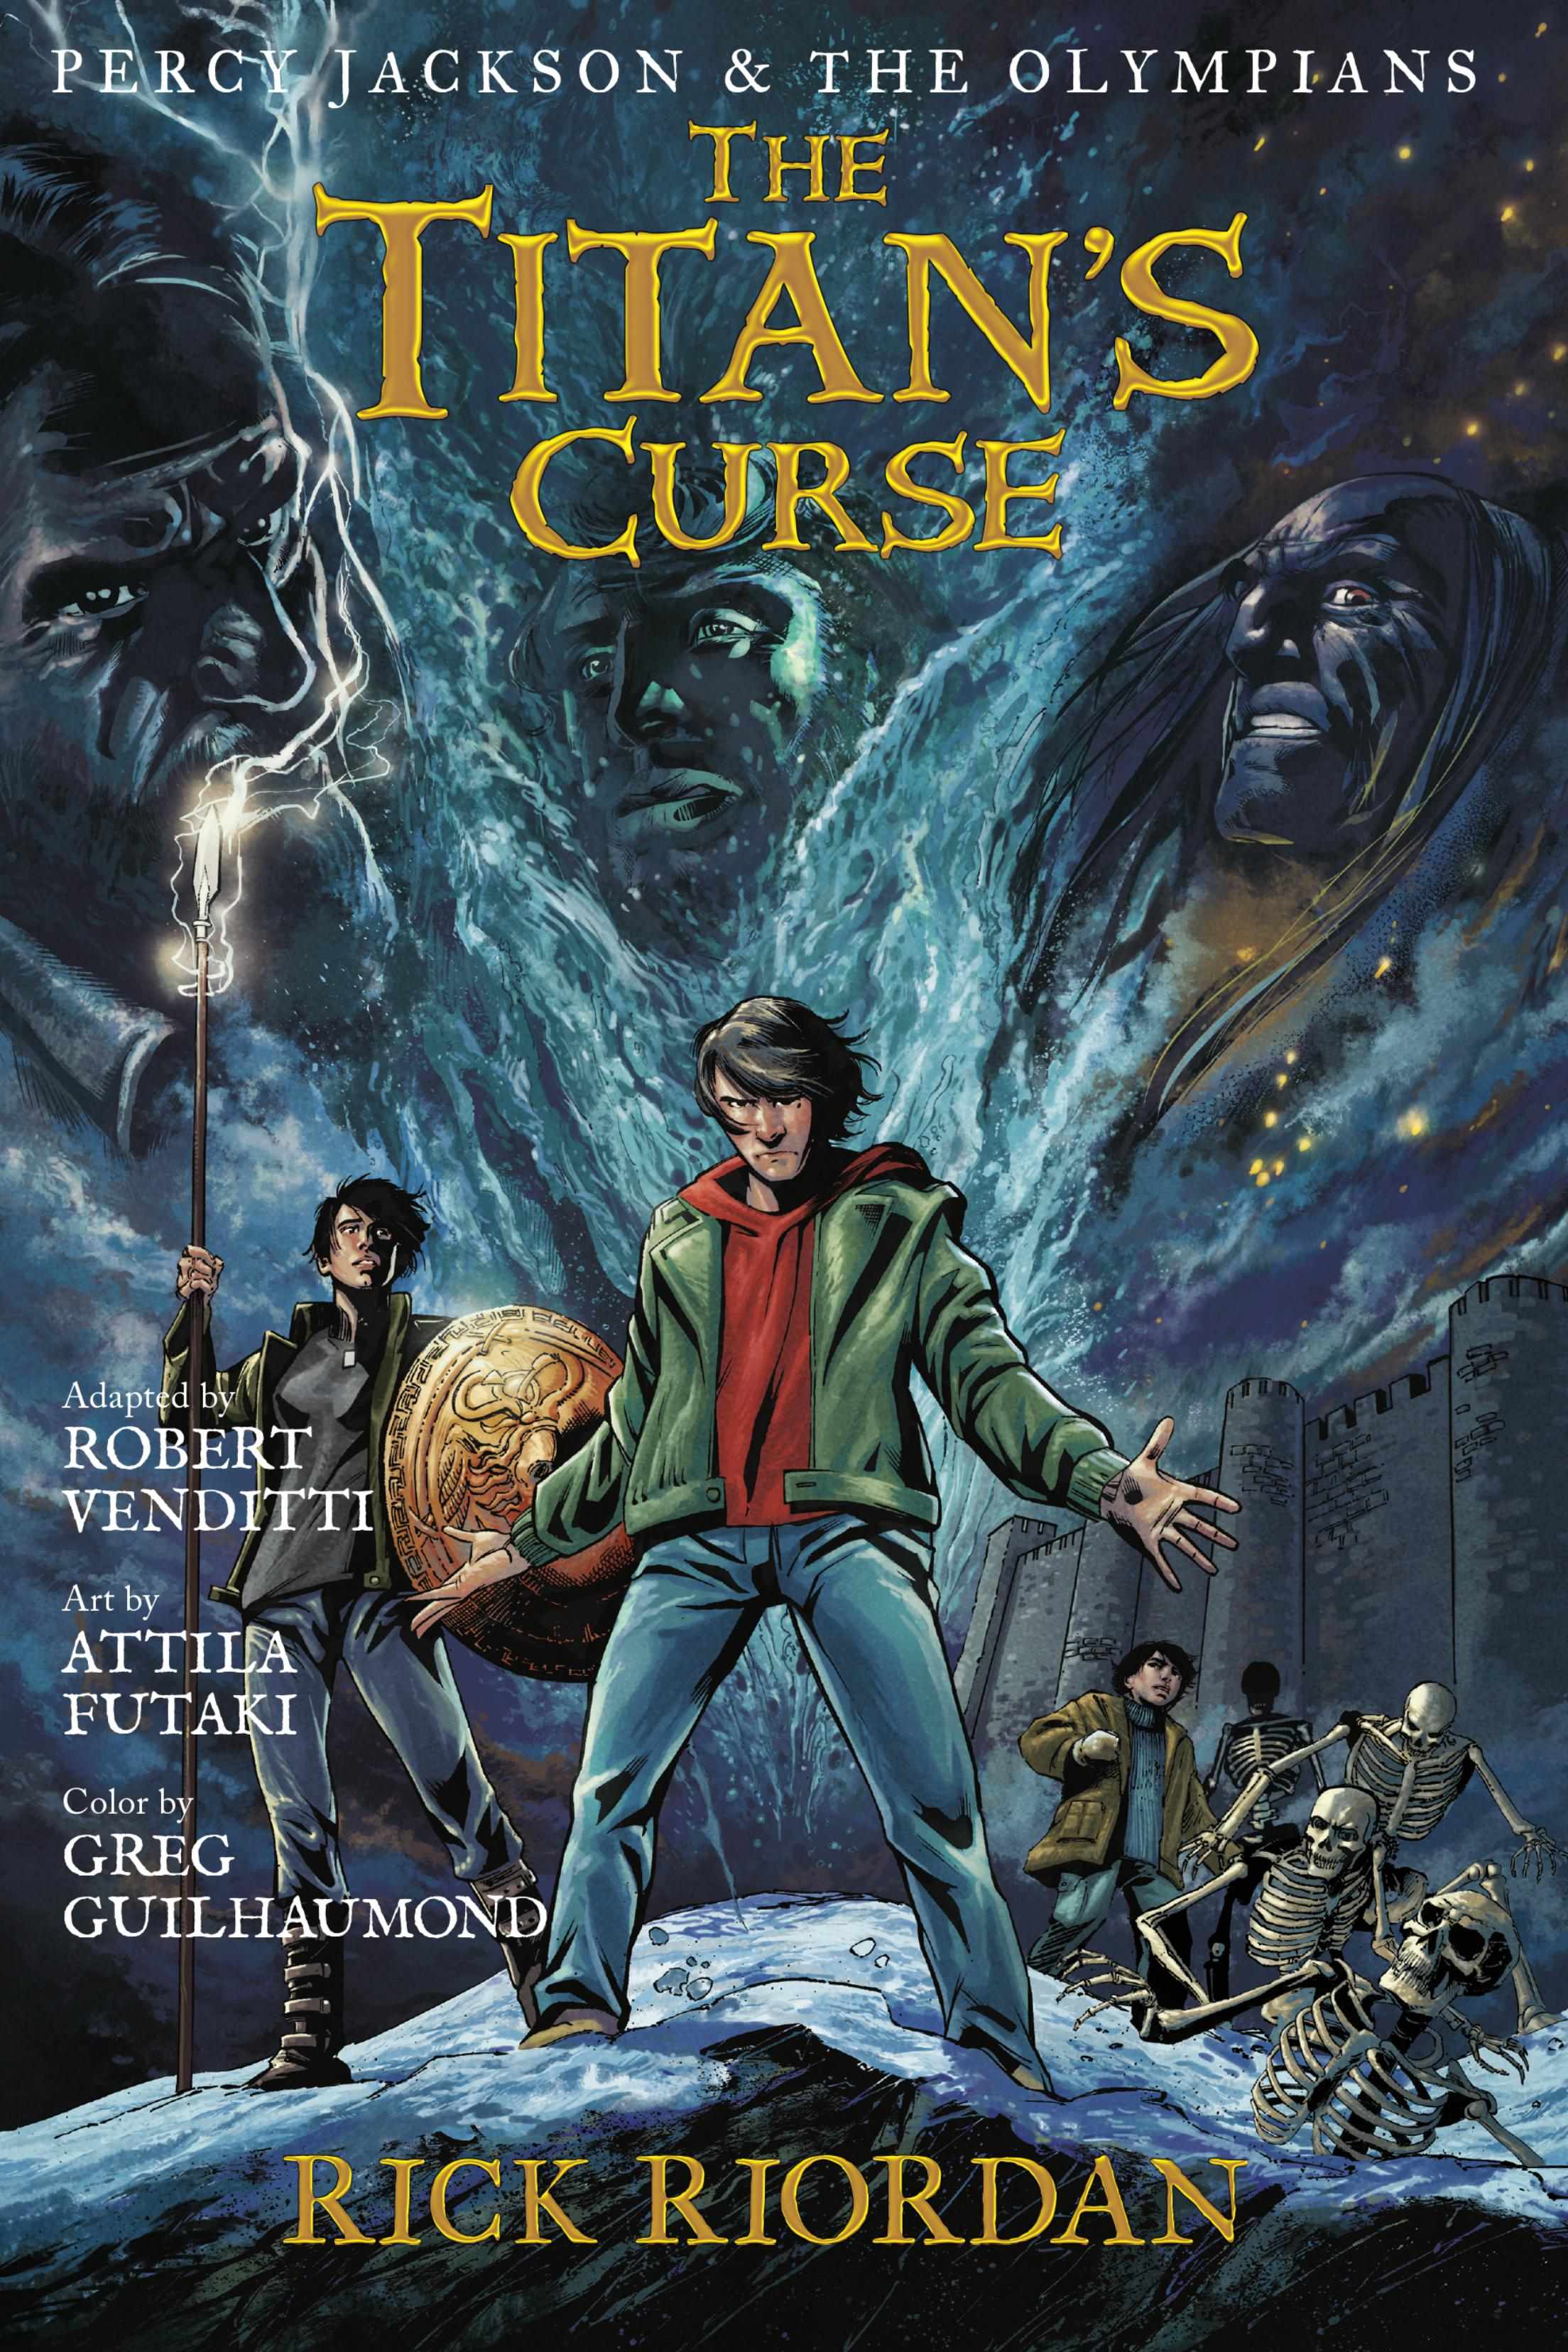 Read online Percy Jackson and the Olympians comic -  Issue # TPB 3 - 1